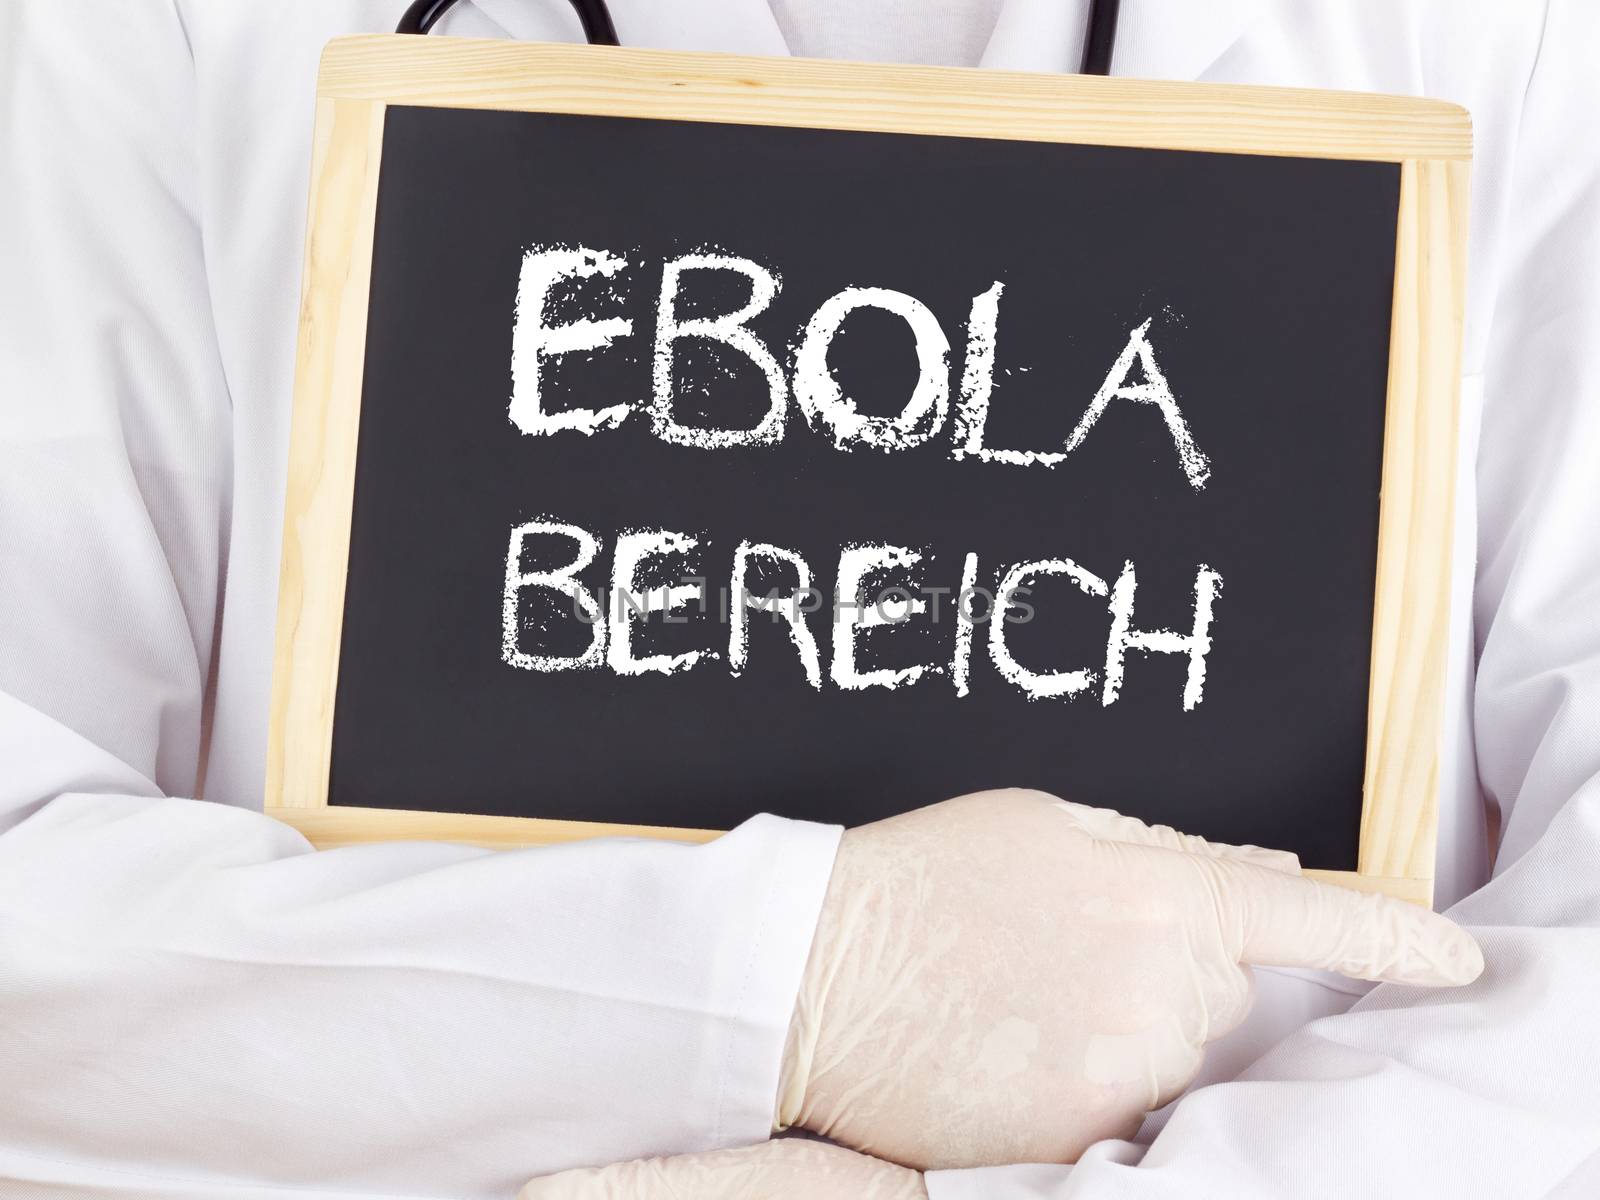 Doctor shows information: Ebola area in german language by gwolters